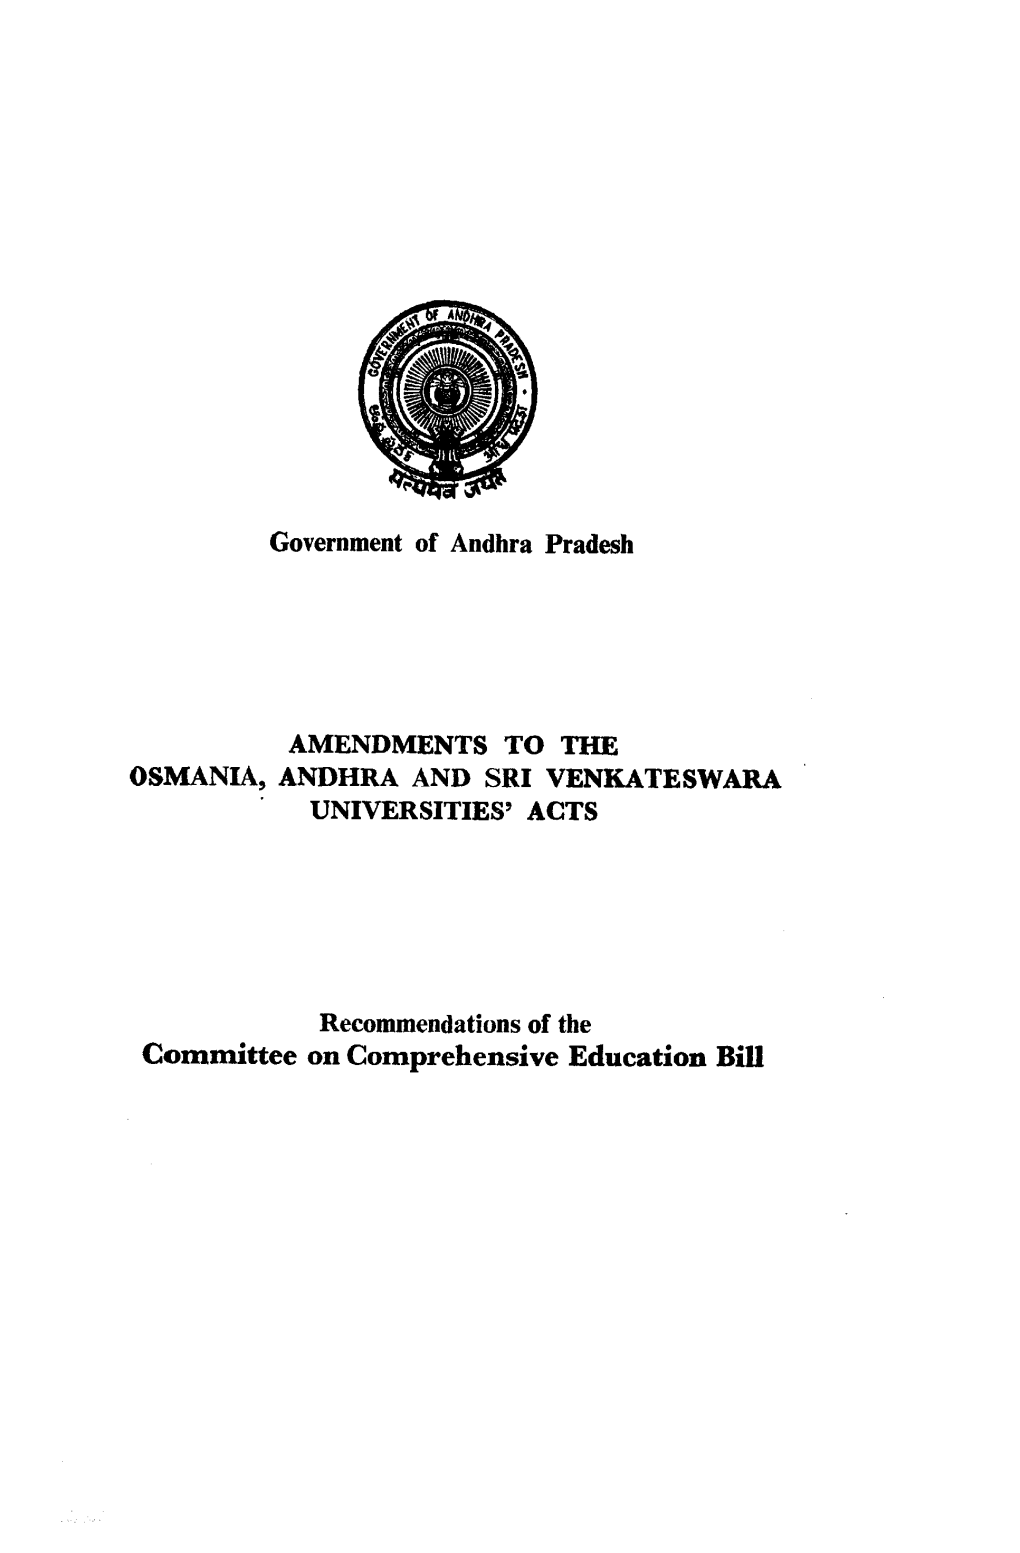 Government of Andhra Pradesh AMENDMENTS to the OSMANIA, ANDHRA and SRI VENKATESWARA UNIVERSITIES5 ACTS Recommendations of the Co